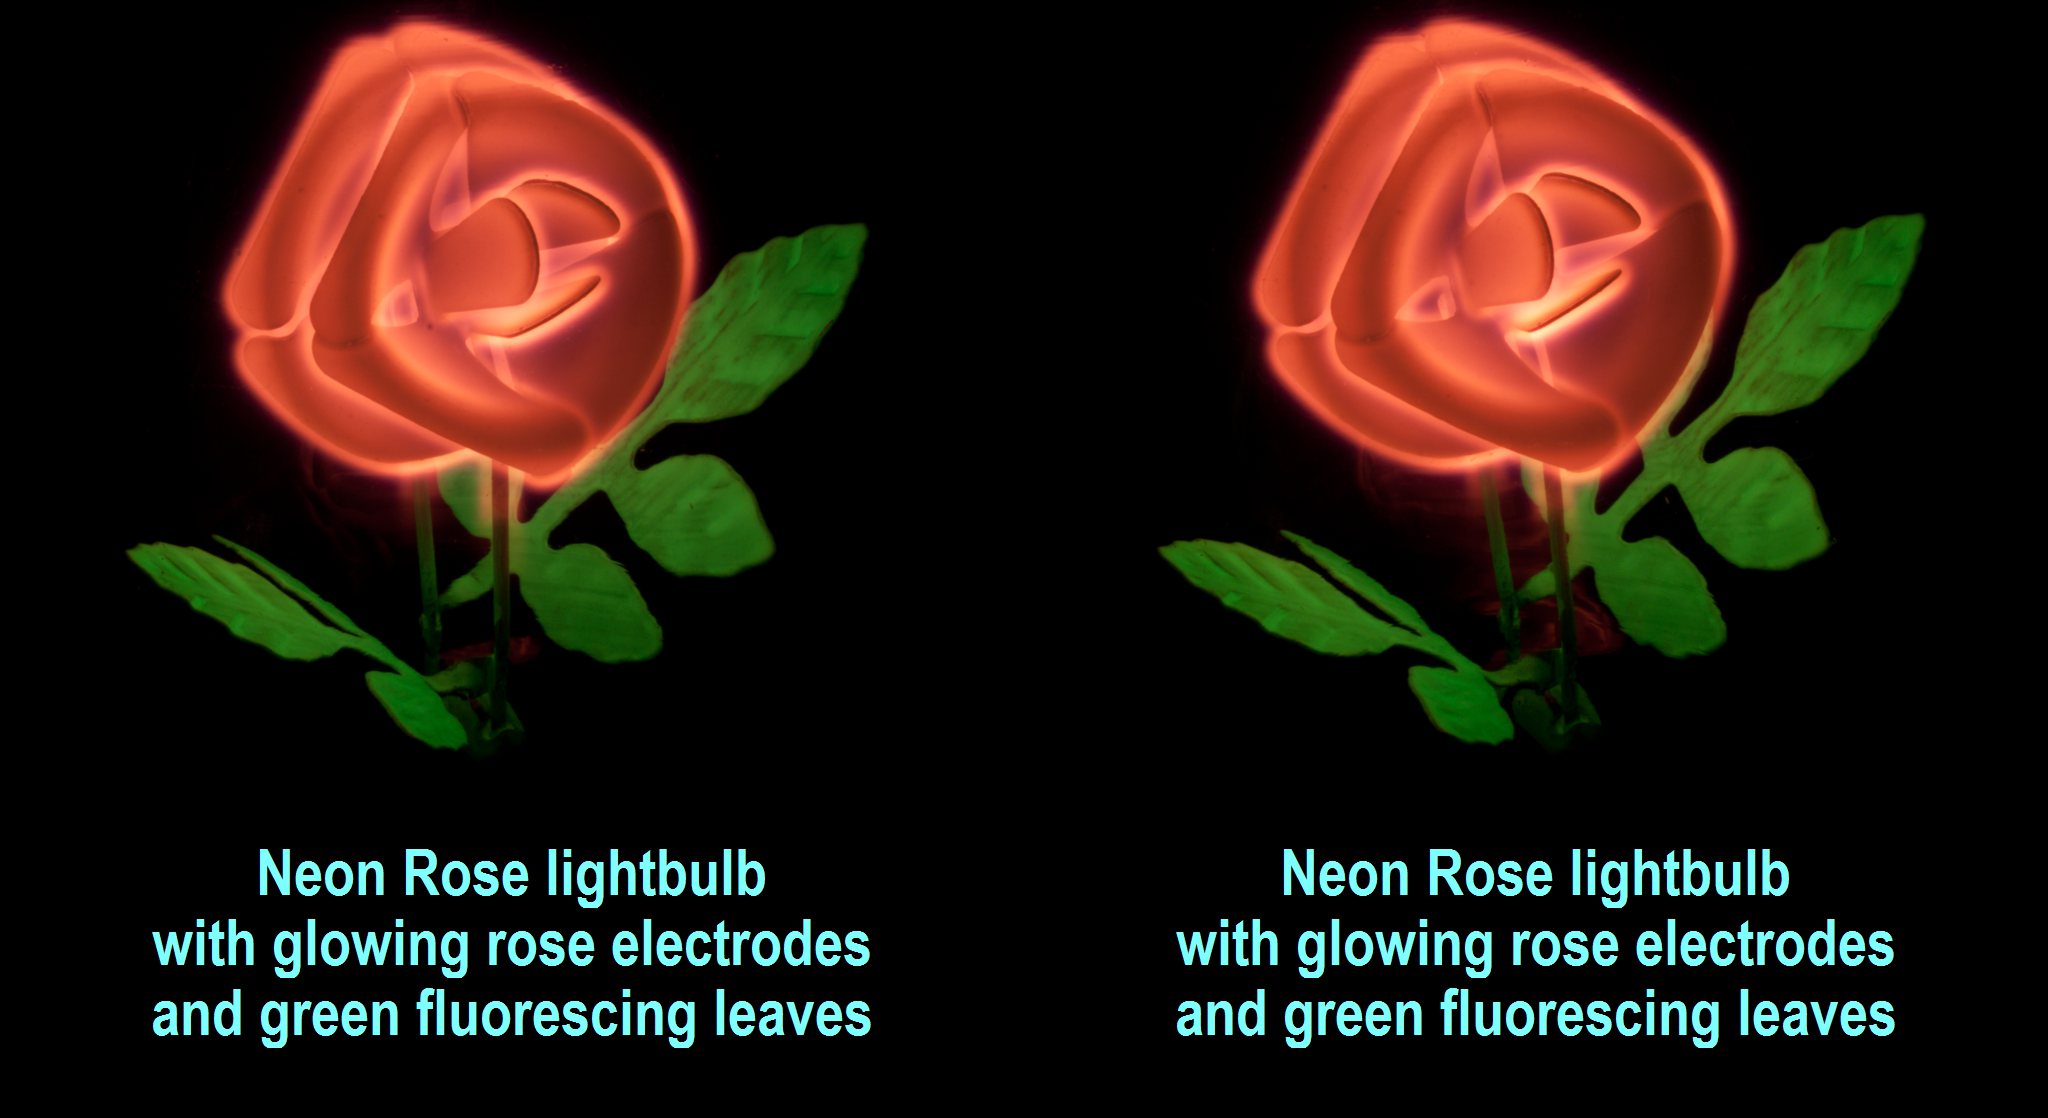 Neon Rose lightbulb with glowing rose electrodes and green fluorescing leaves